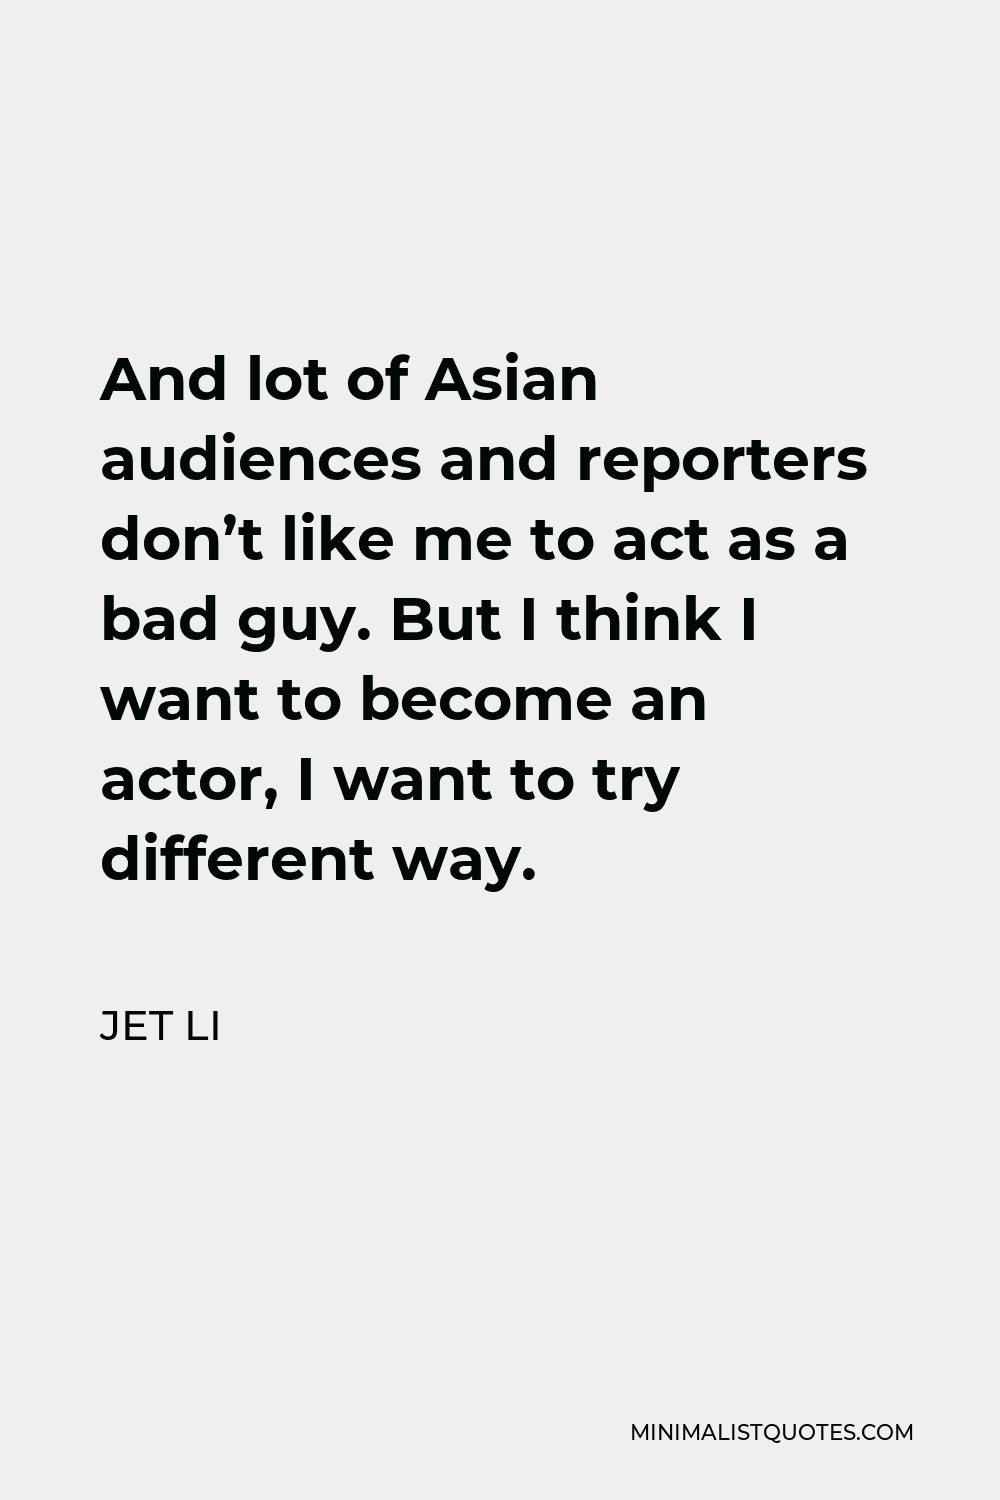 Jet Li Quote - And lot of Asian audiences and reporters don’t like me to act as a bad guy. But I think I want to become an actor, I want to try different way.